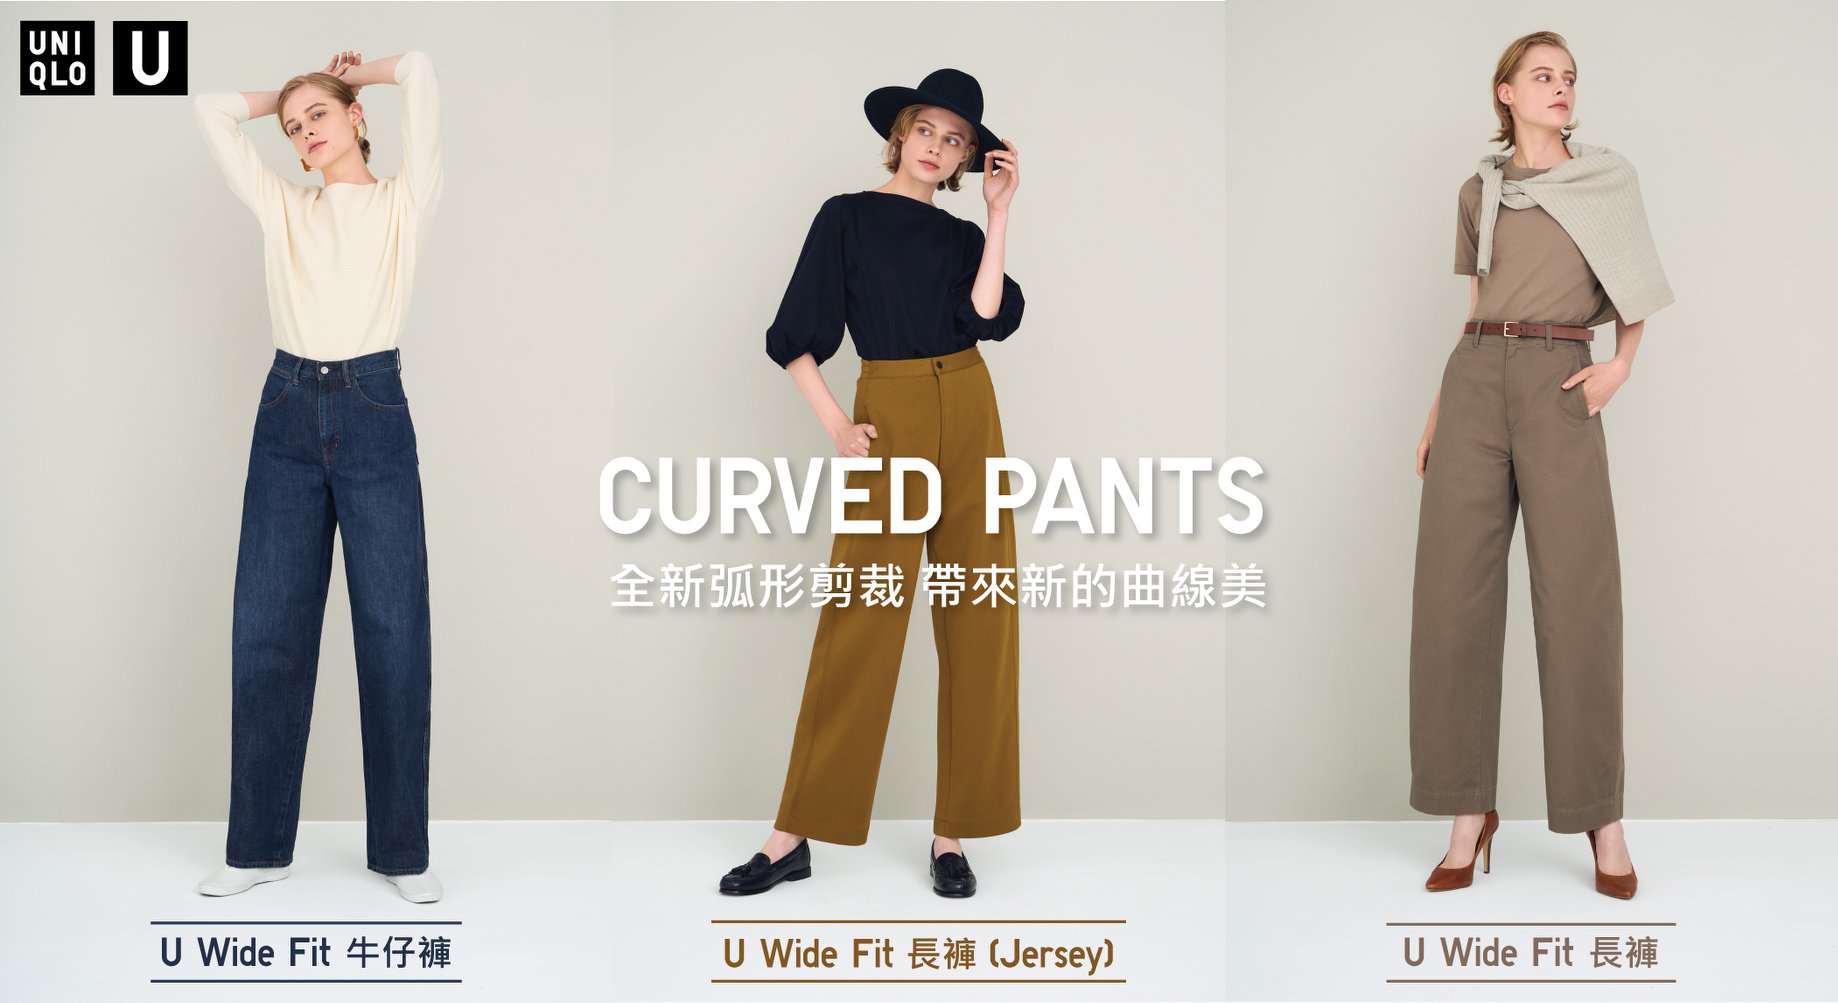 【#NewBottoms: CURVED PANTS】